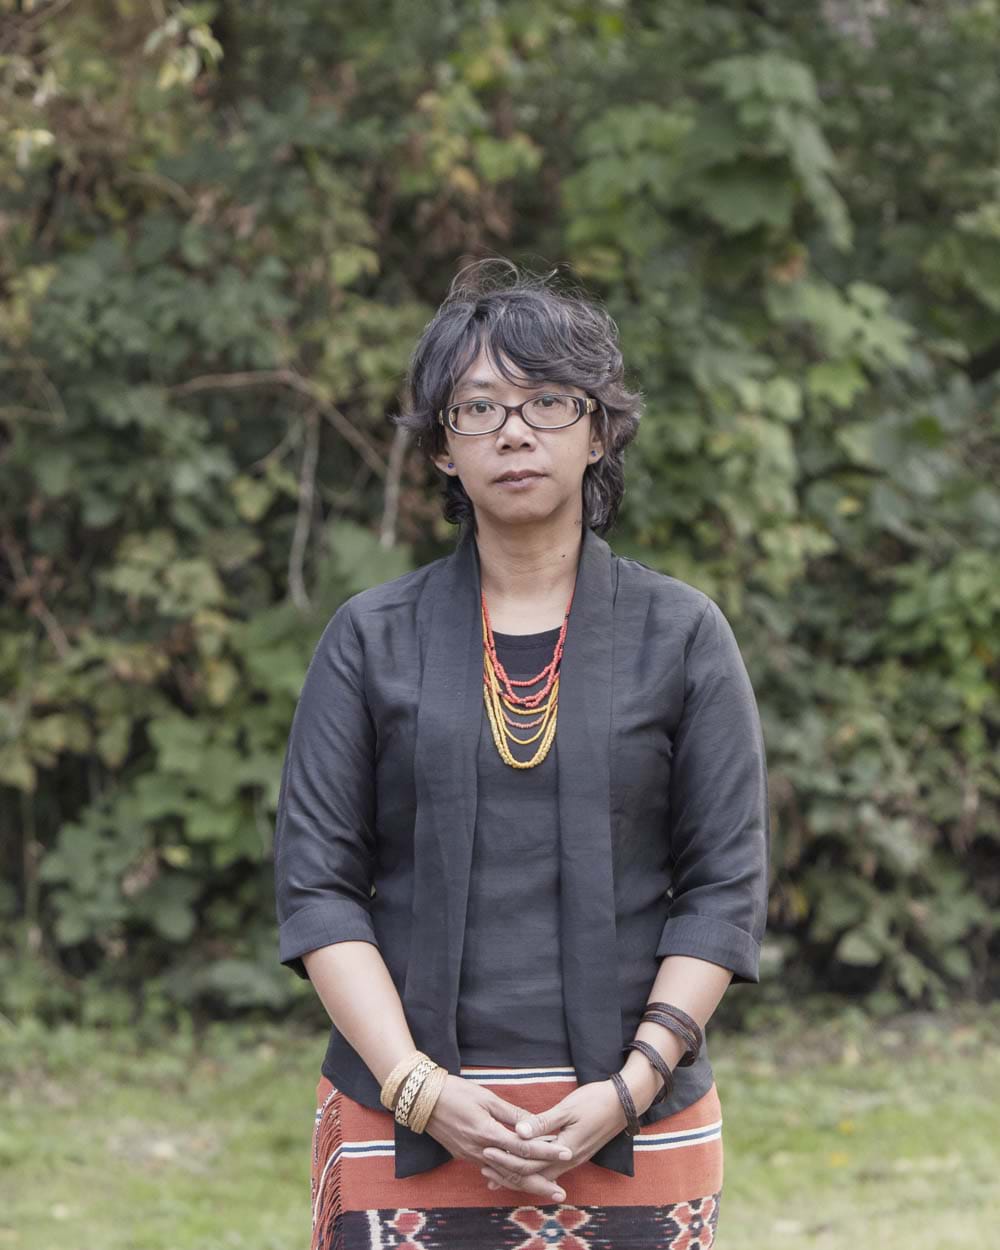 An Indigenous Dayak woman with short black hair and eyeglasses wearing a black jacket with a t-shirt underneath and a traditional orange Dayak skirt with florals and vertical lines. Behind her are green trees.